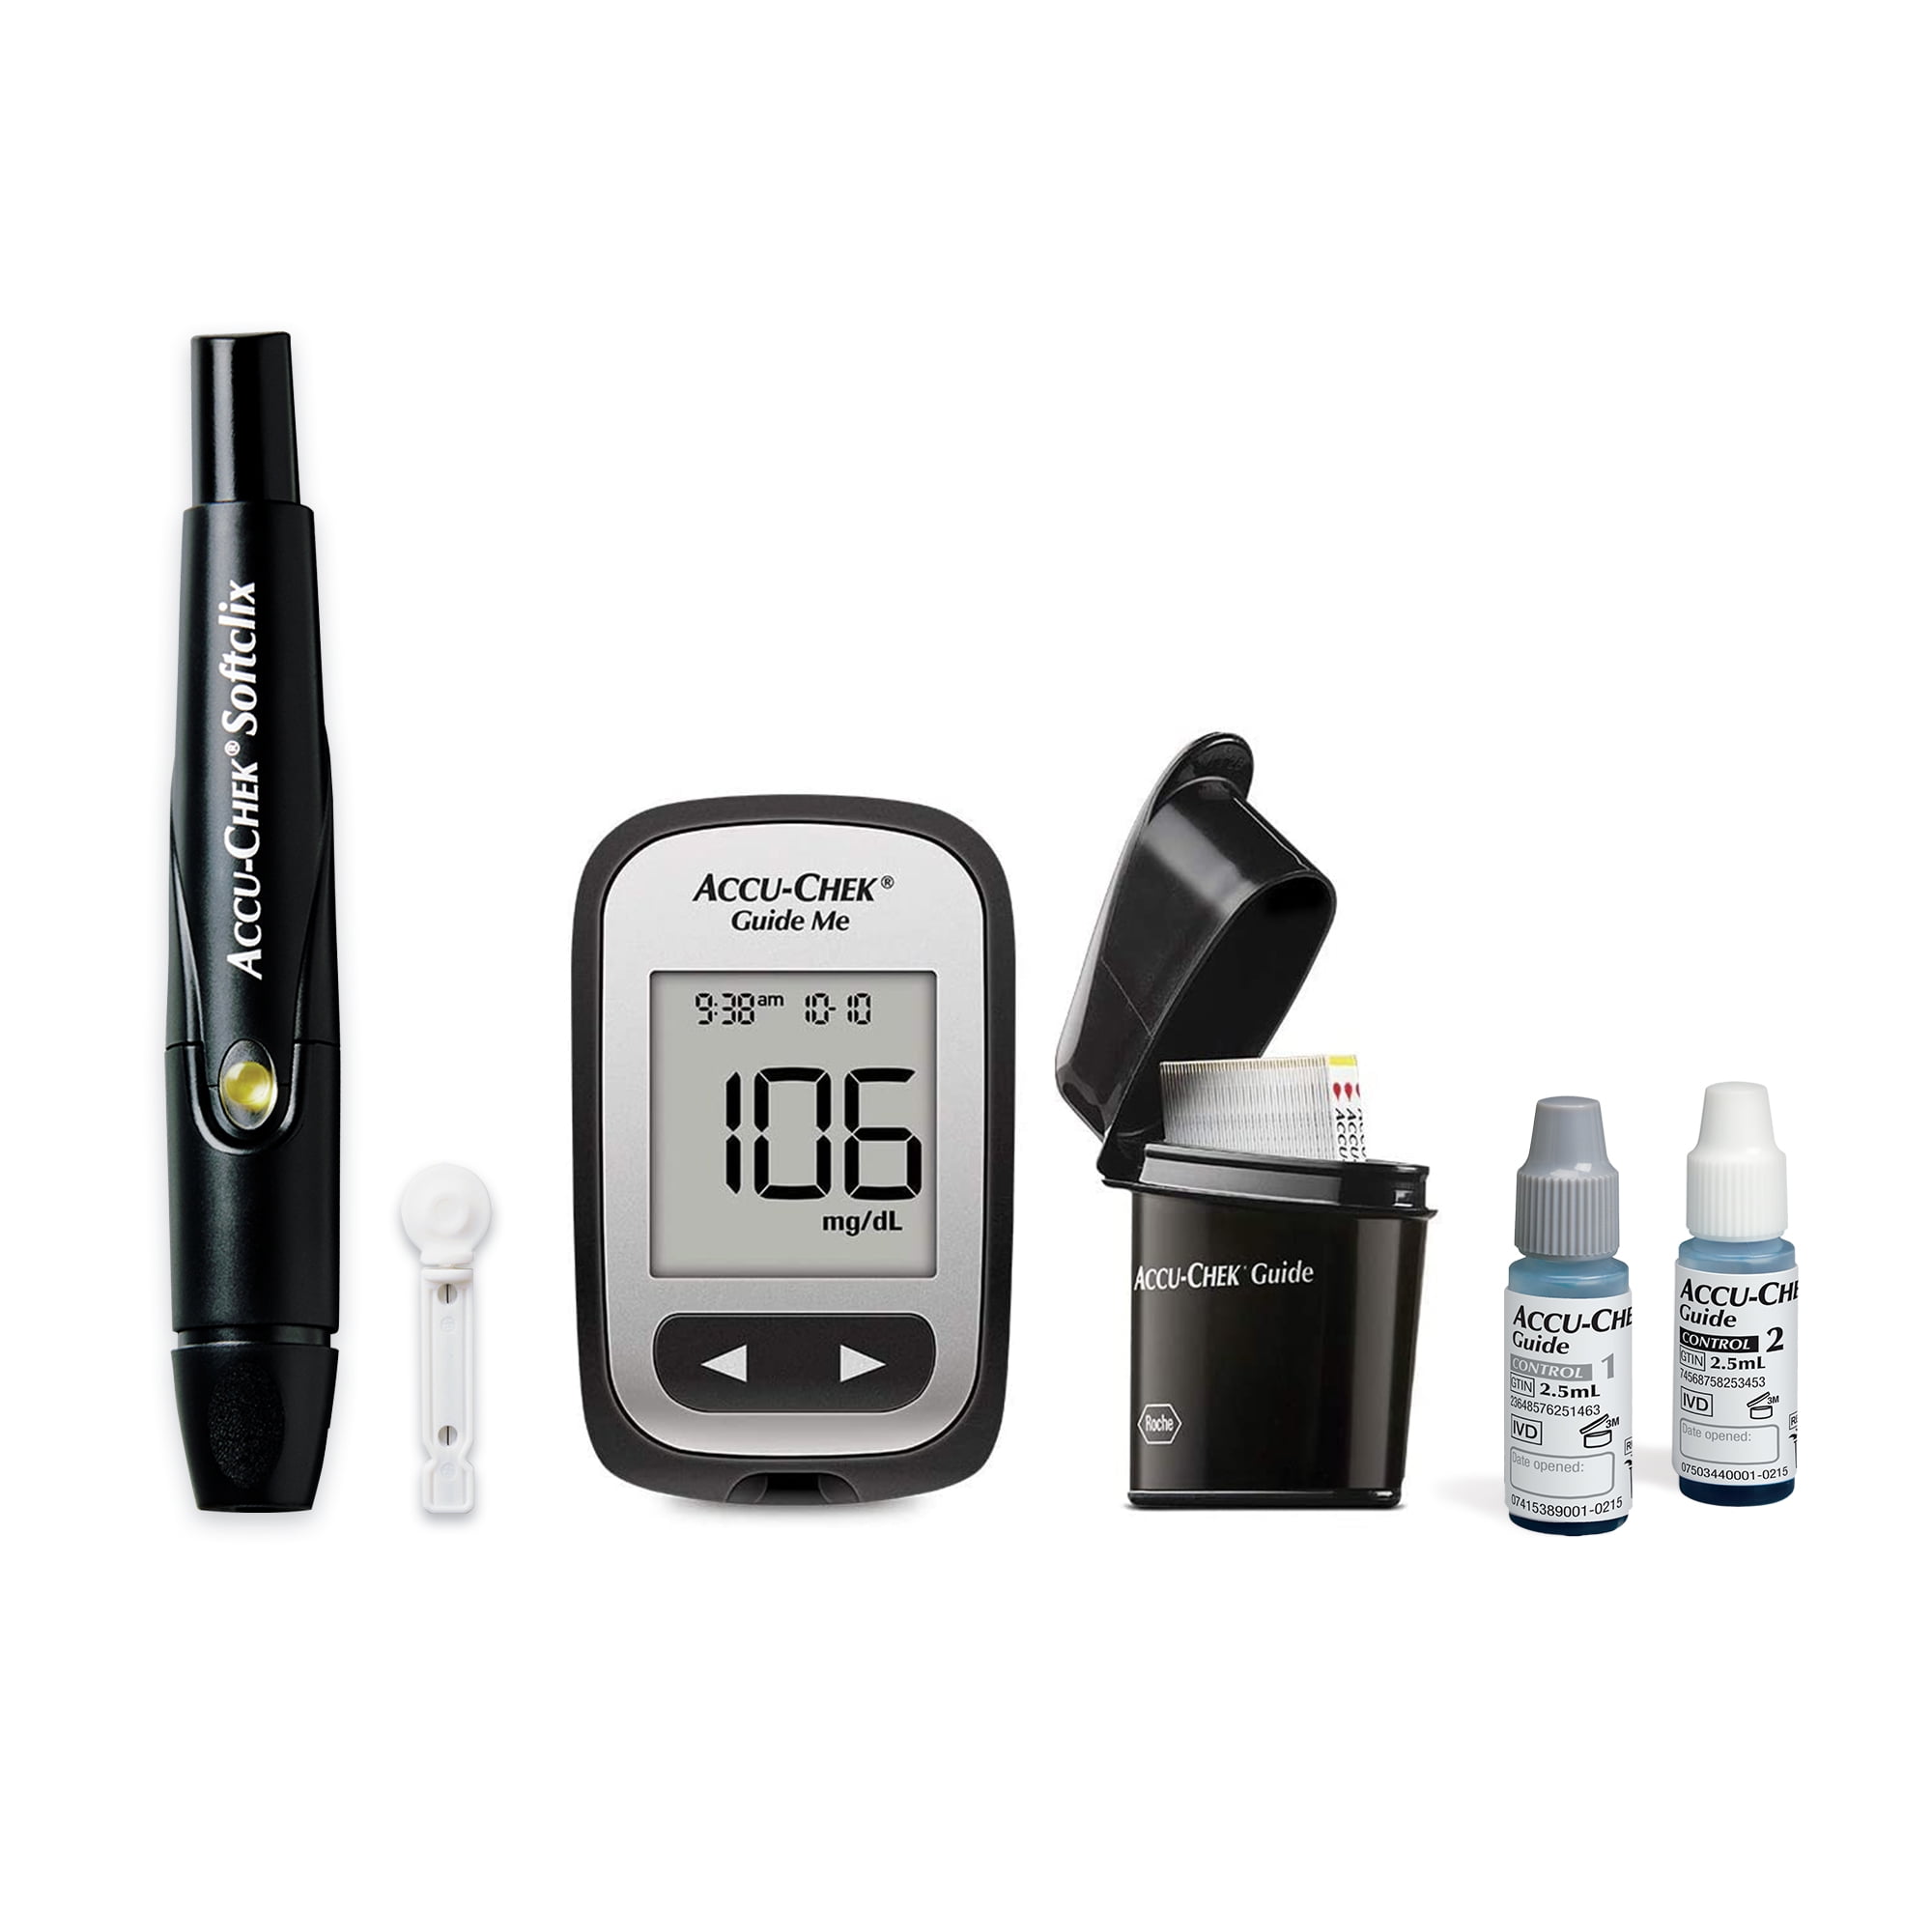 Accu-Chek Softclix Glucose Monitor Kit for Diabetic Blood Sugar Testing:  Guide Me Meter, Softclix Lancing Device & 110 Lancets, 100 Guide Test  Strips, and Control Solution (Packaging May Vary) 